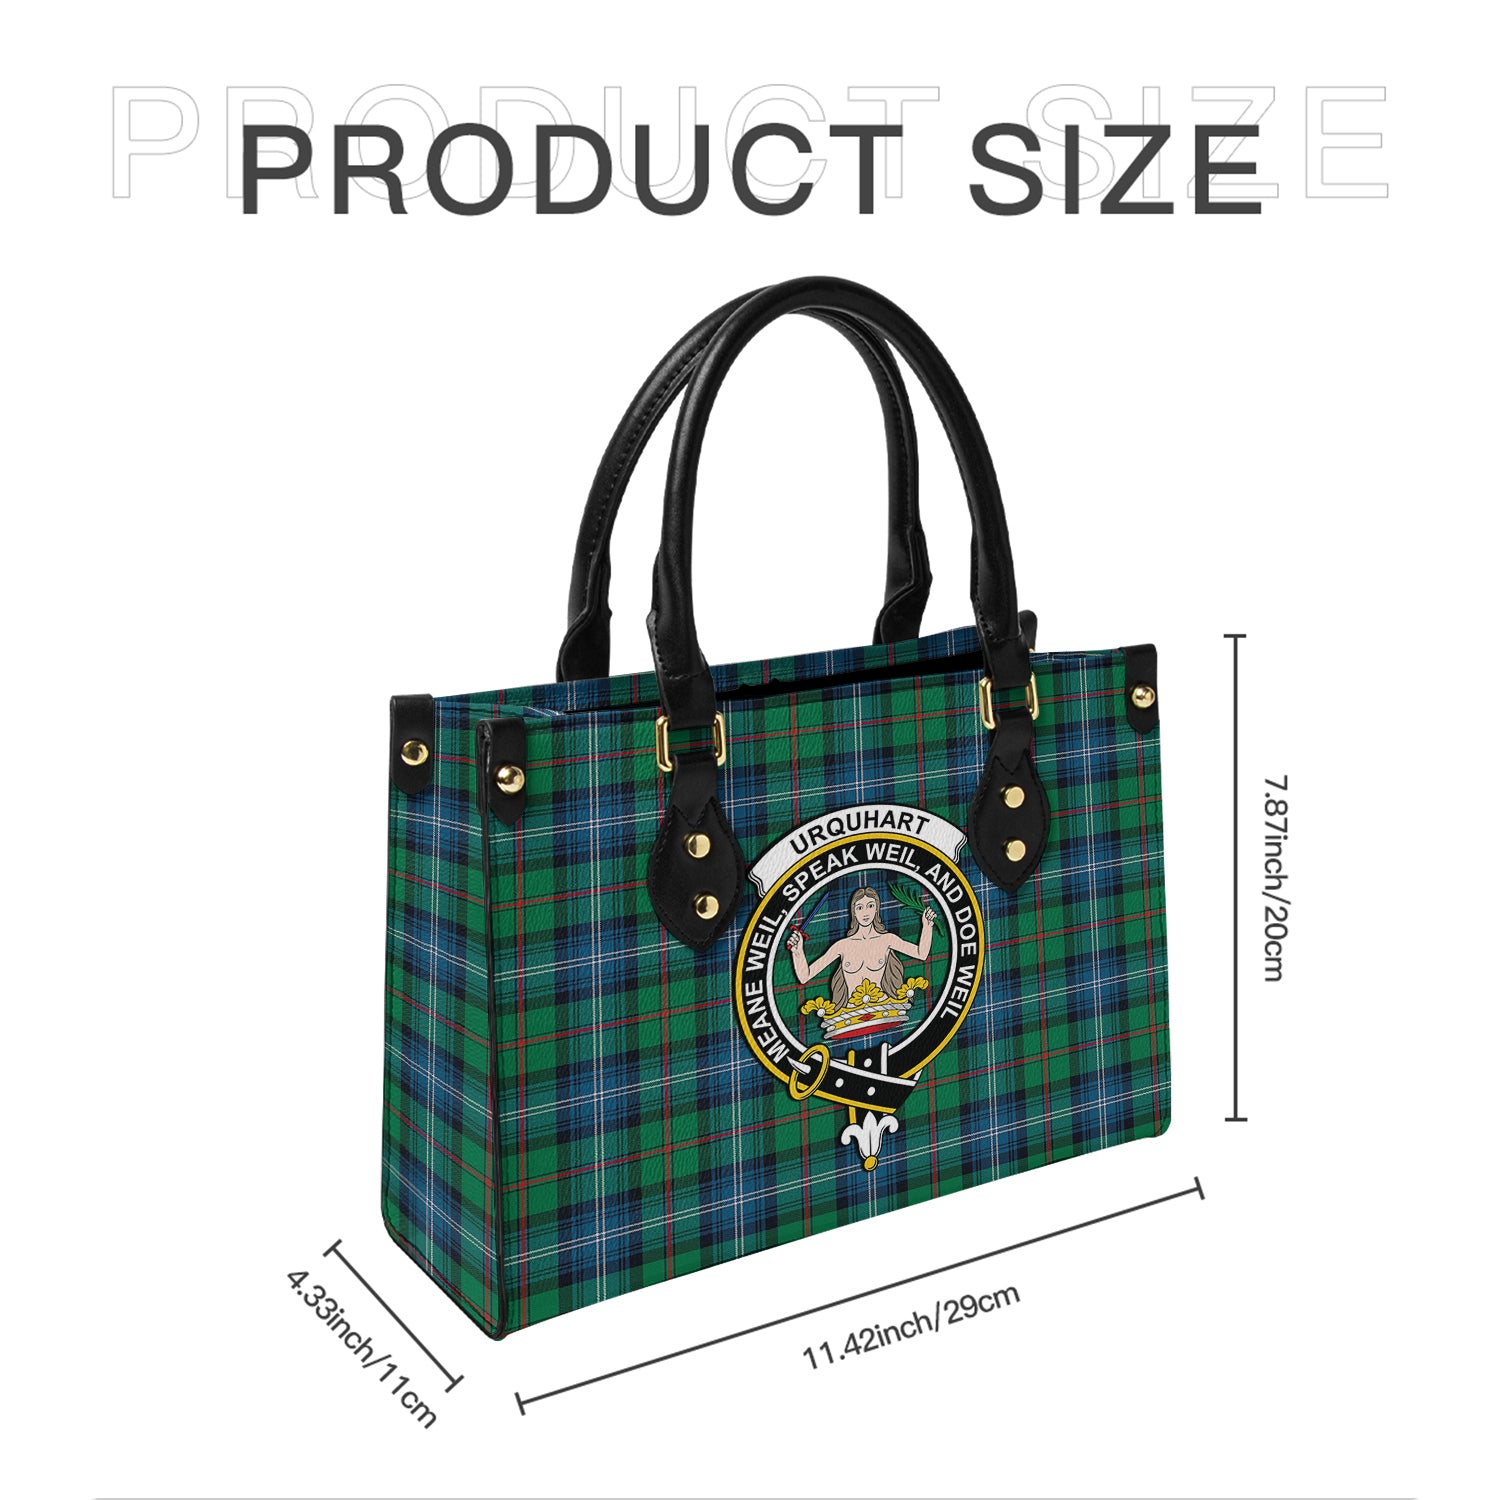 urquhart-ancient-tartan-leather-bag-with-family-crest